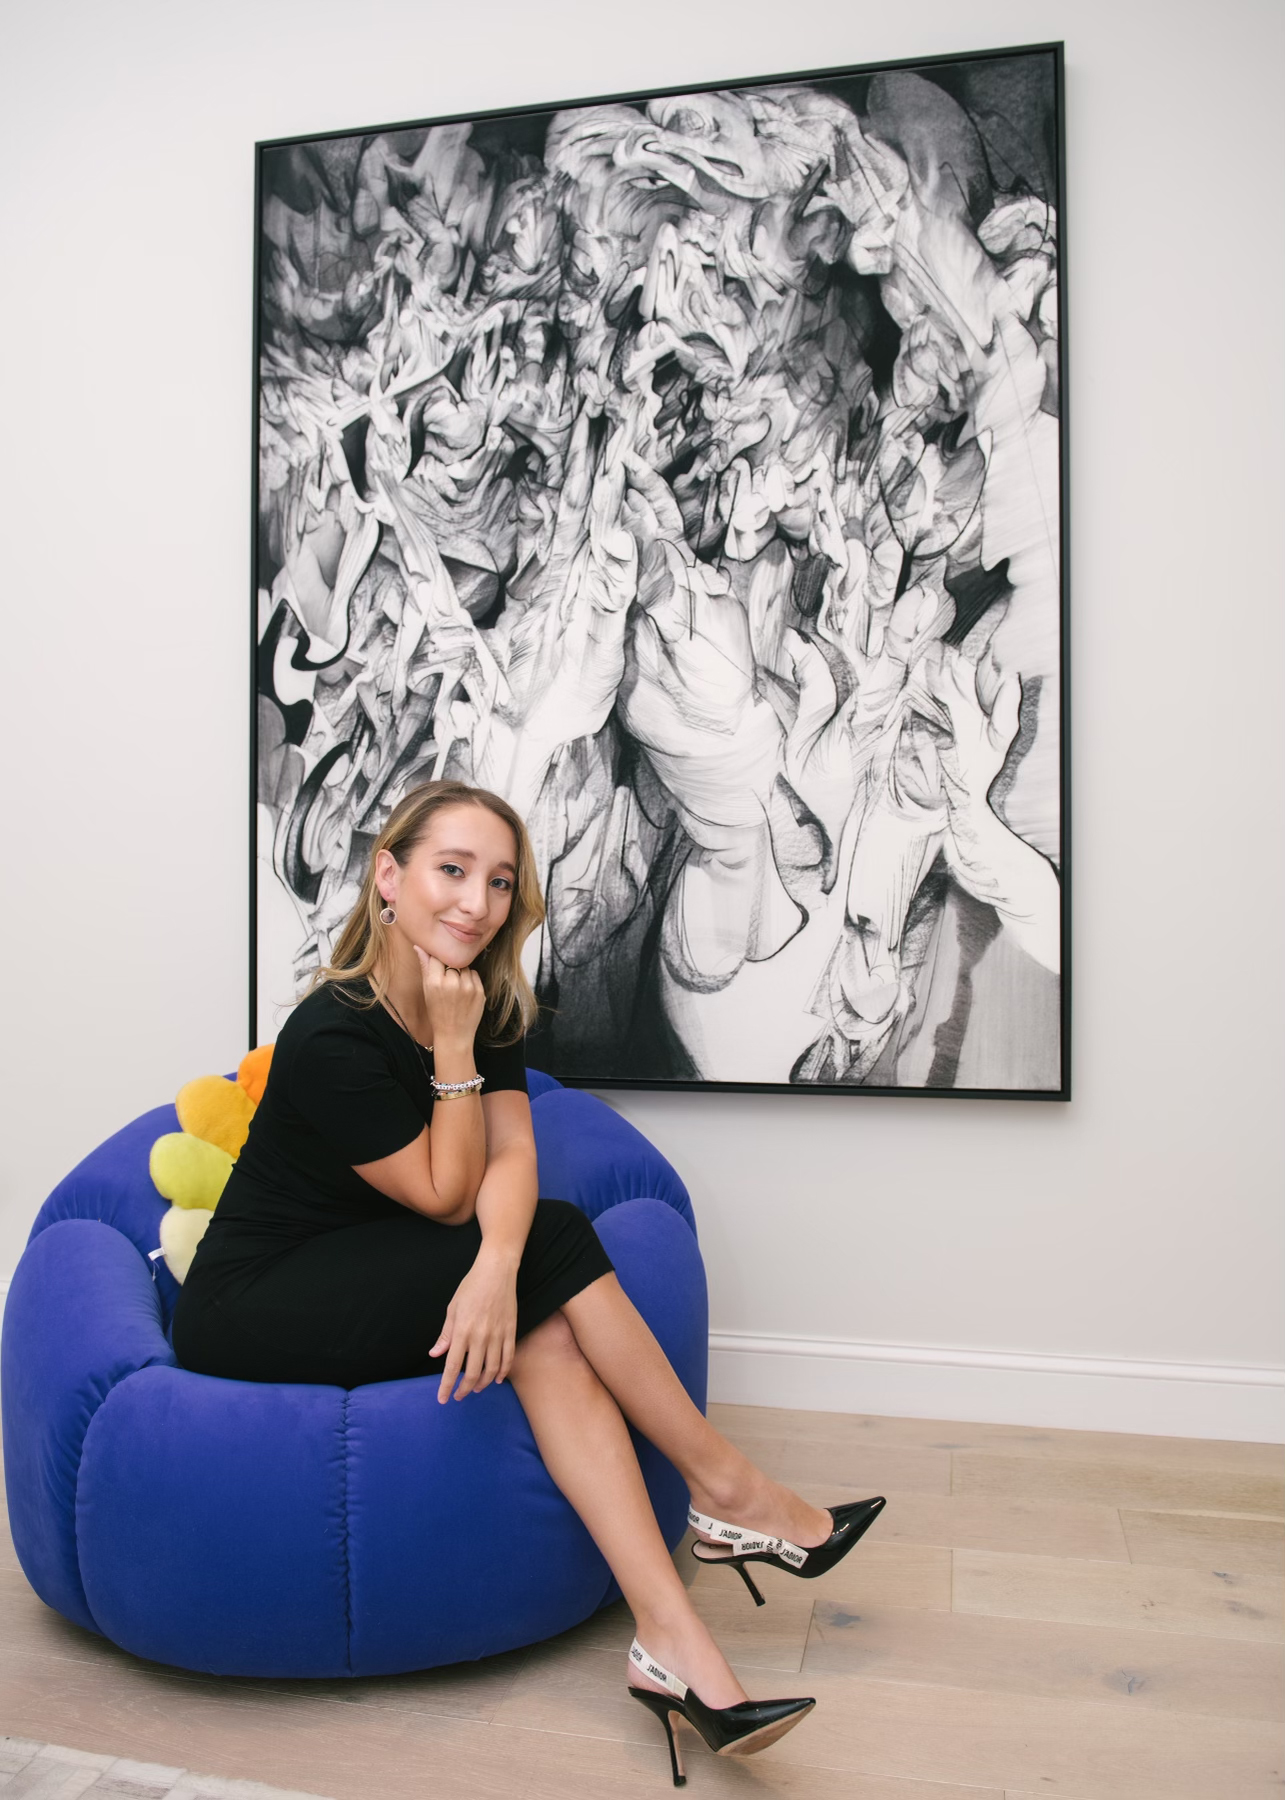 Sophia Cohen in her New York home with Anna Park’s Meet Me in the Middle (2020). Portrait by Griffon Lipson.